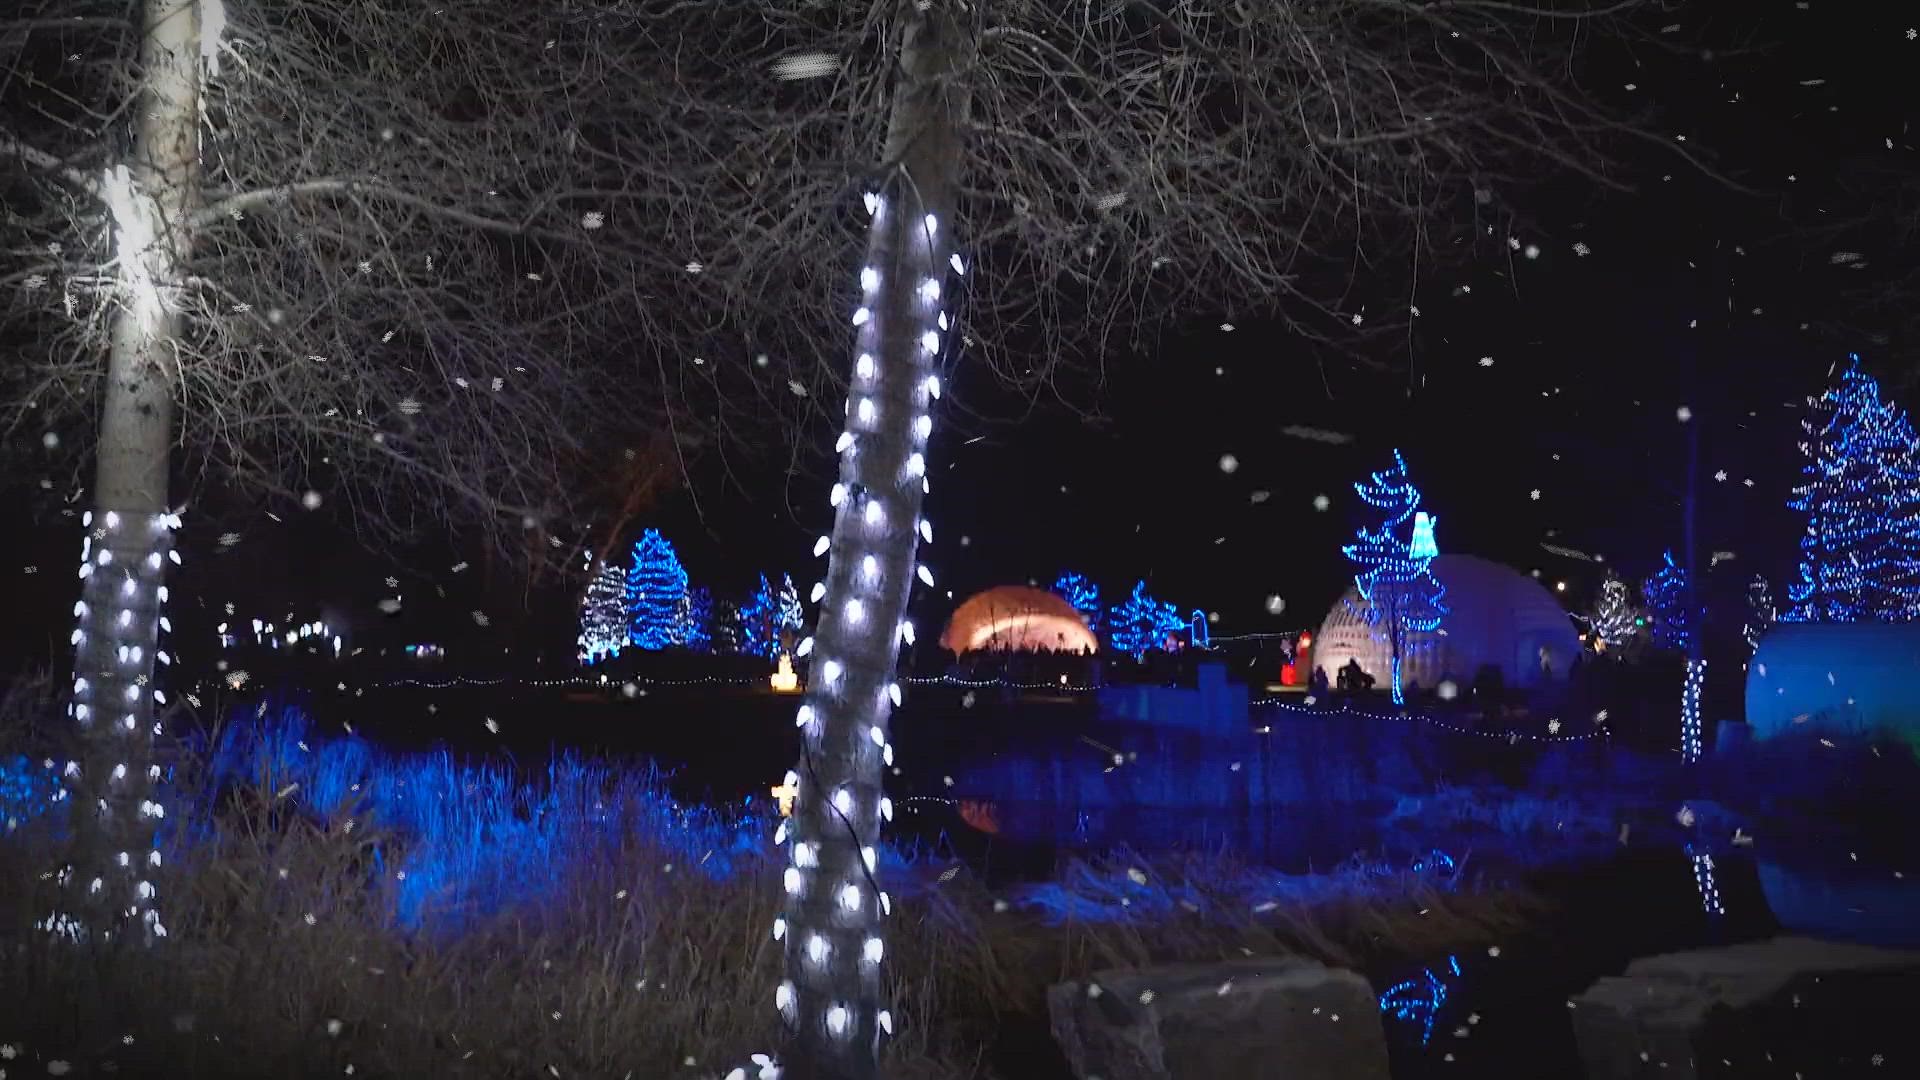 Winter Wonderlights is a free walkable lighting attraction situated in the award-winning Chapungu Sculpture Park at Centerra.